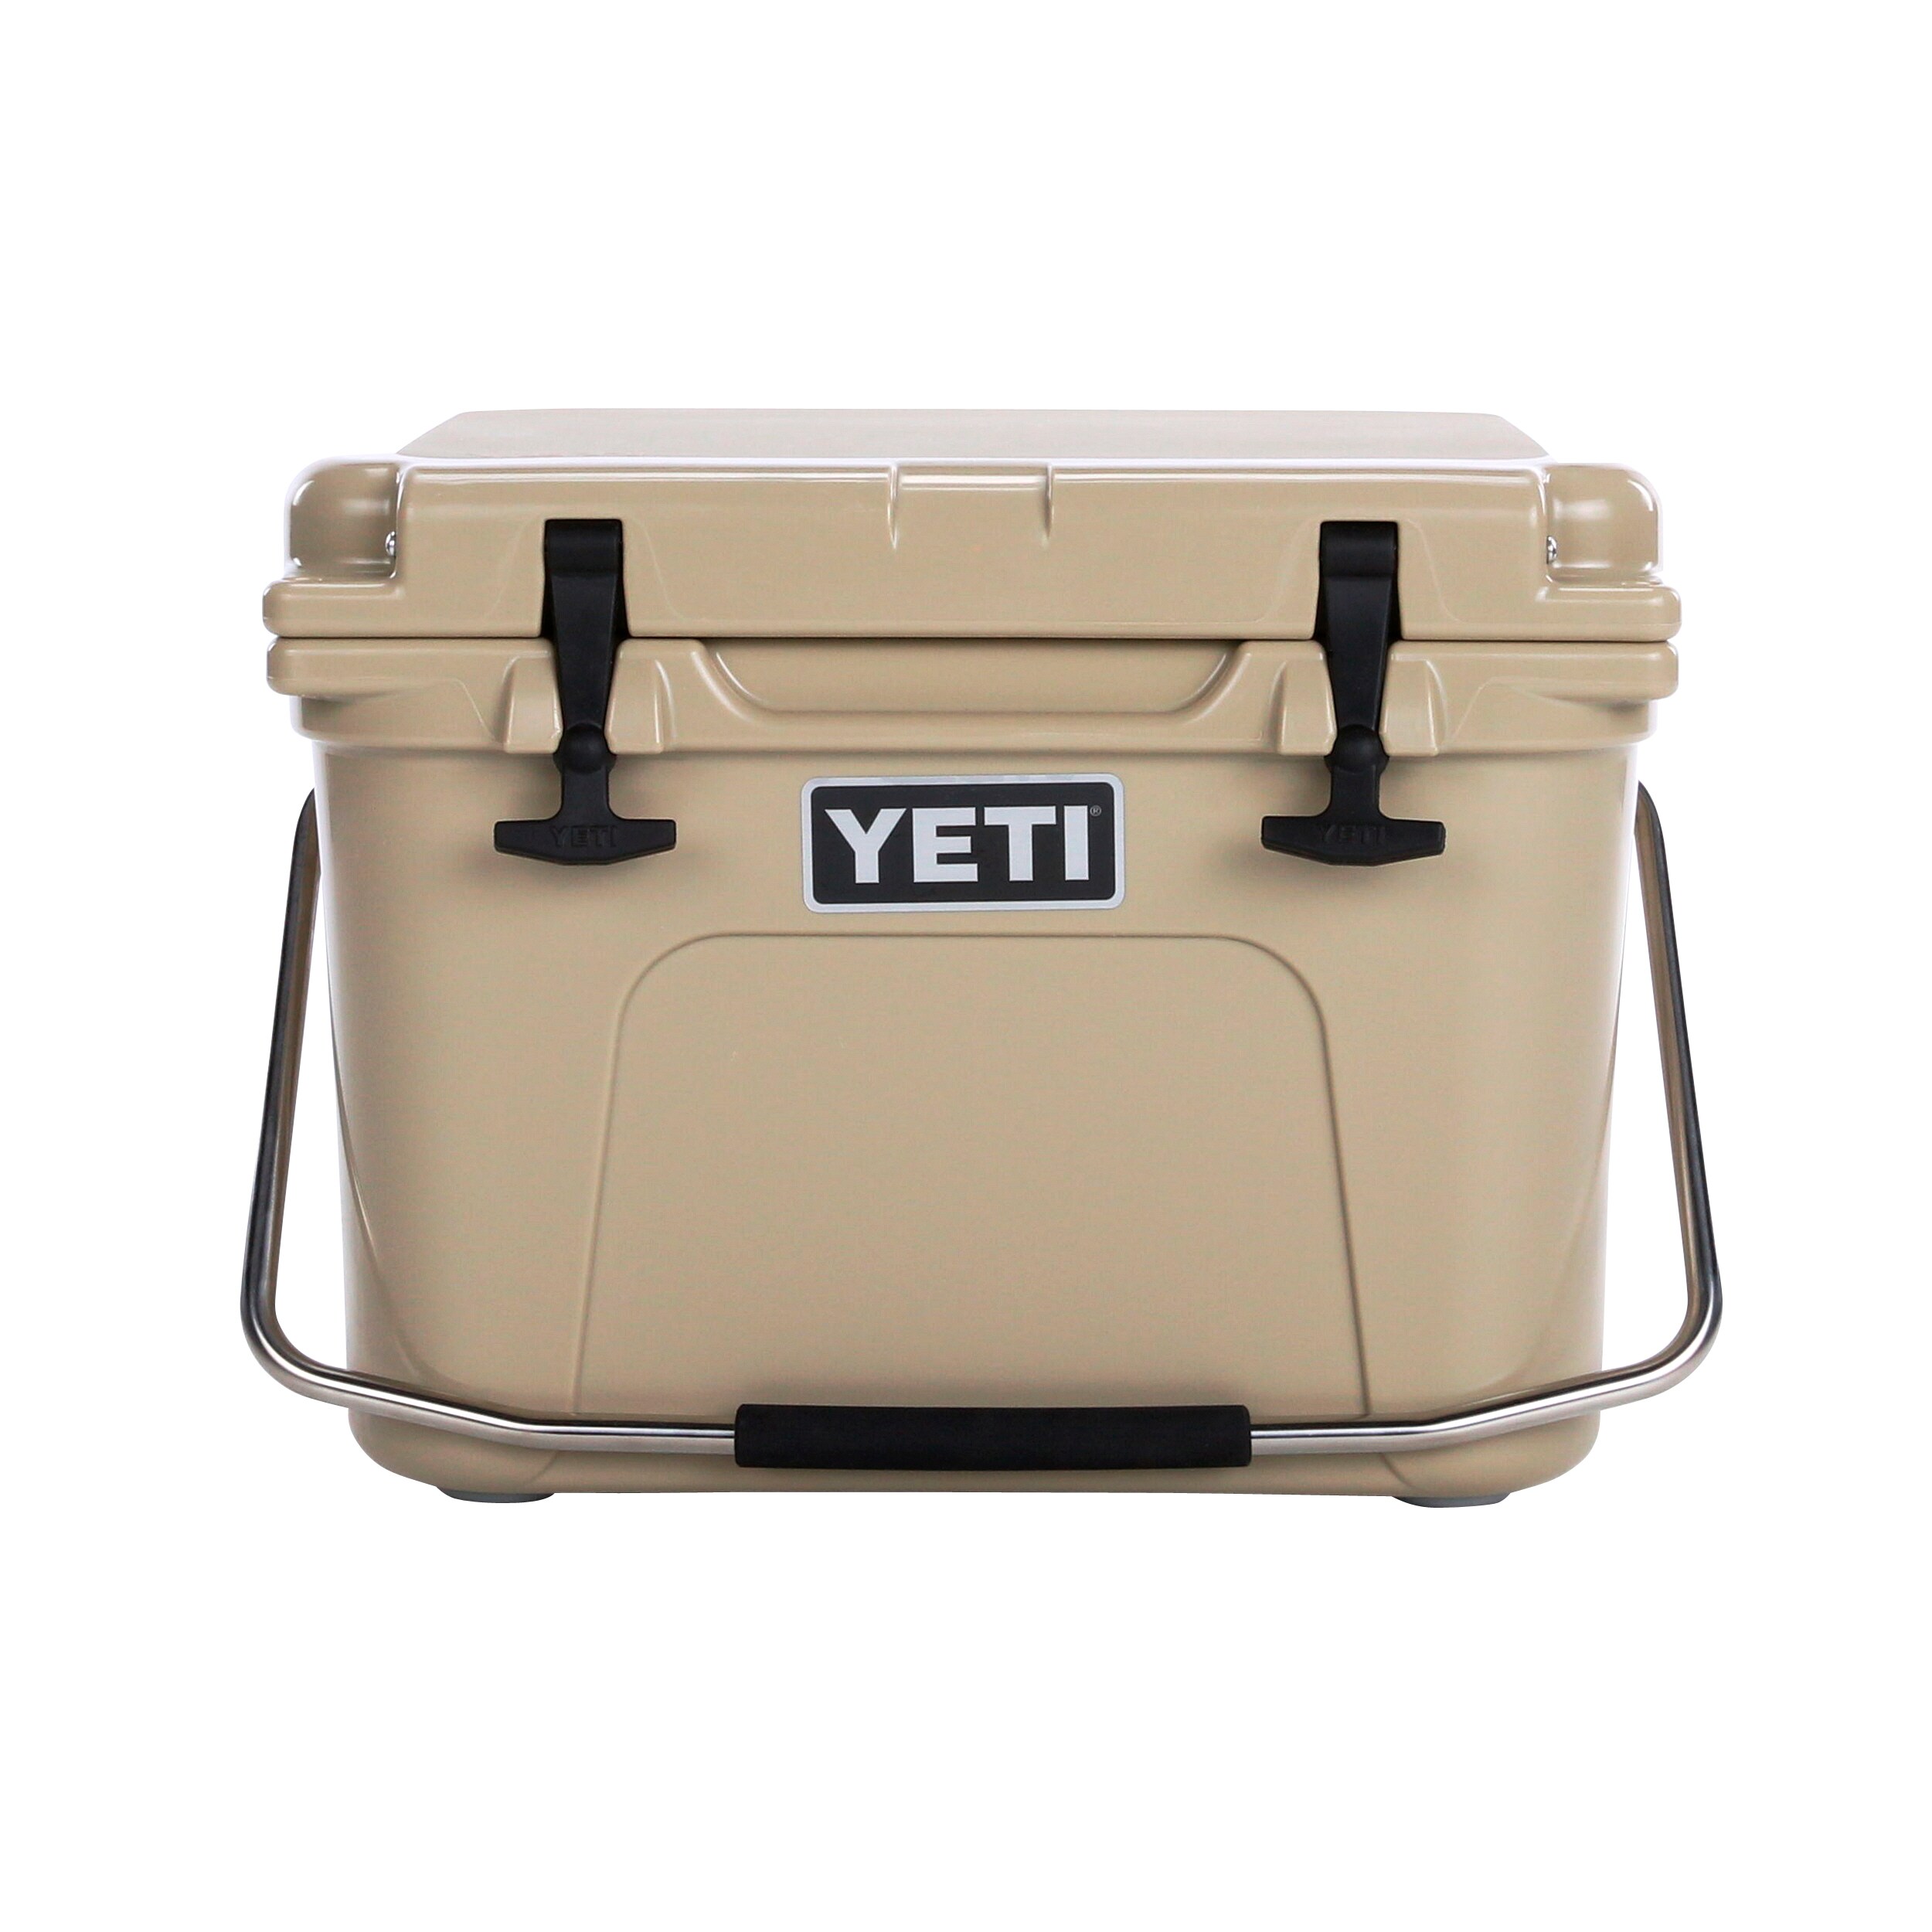 YETI Roadie 20 Insulated Chest Cooler at Lowes.com